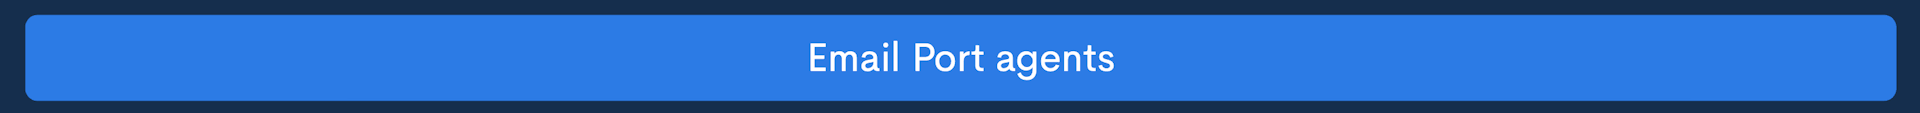 Introducing Semaphore: Automated Port Agent Email